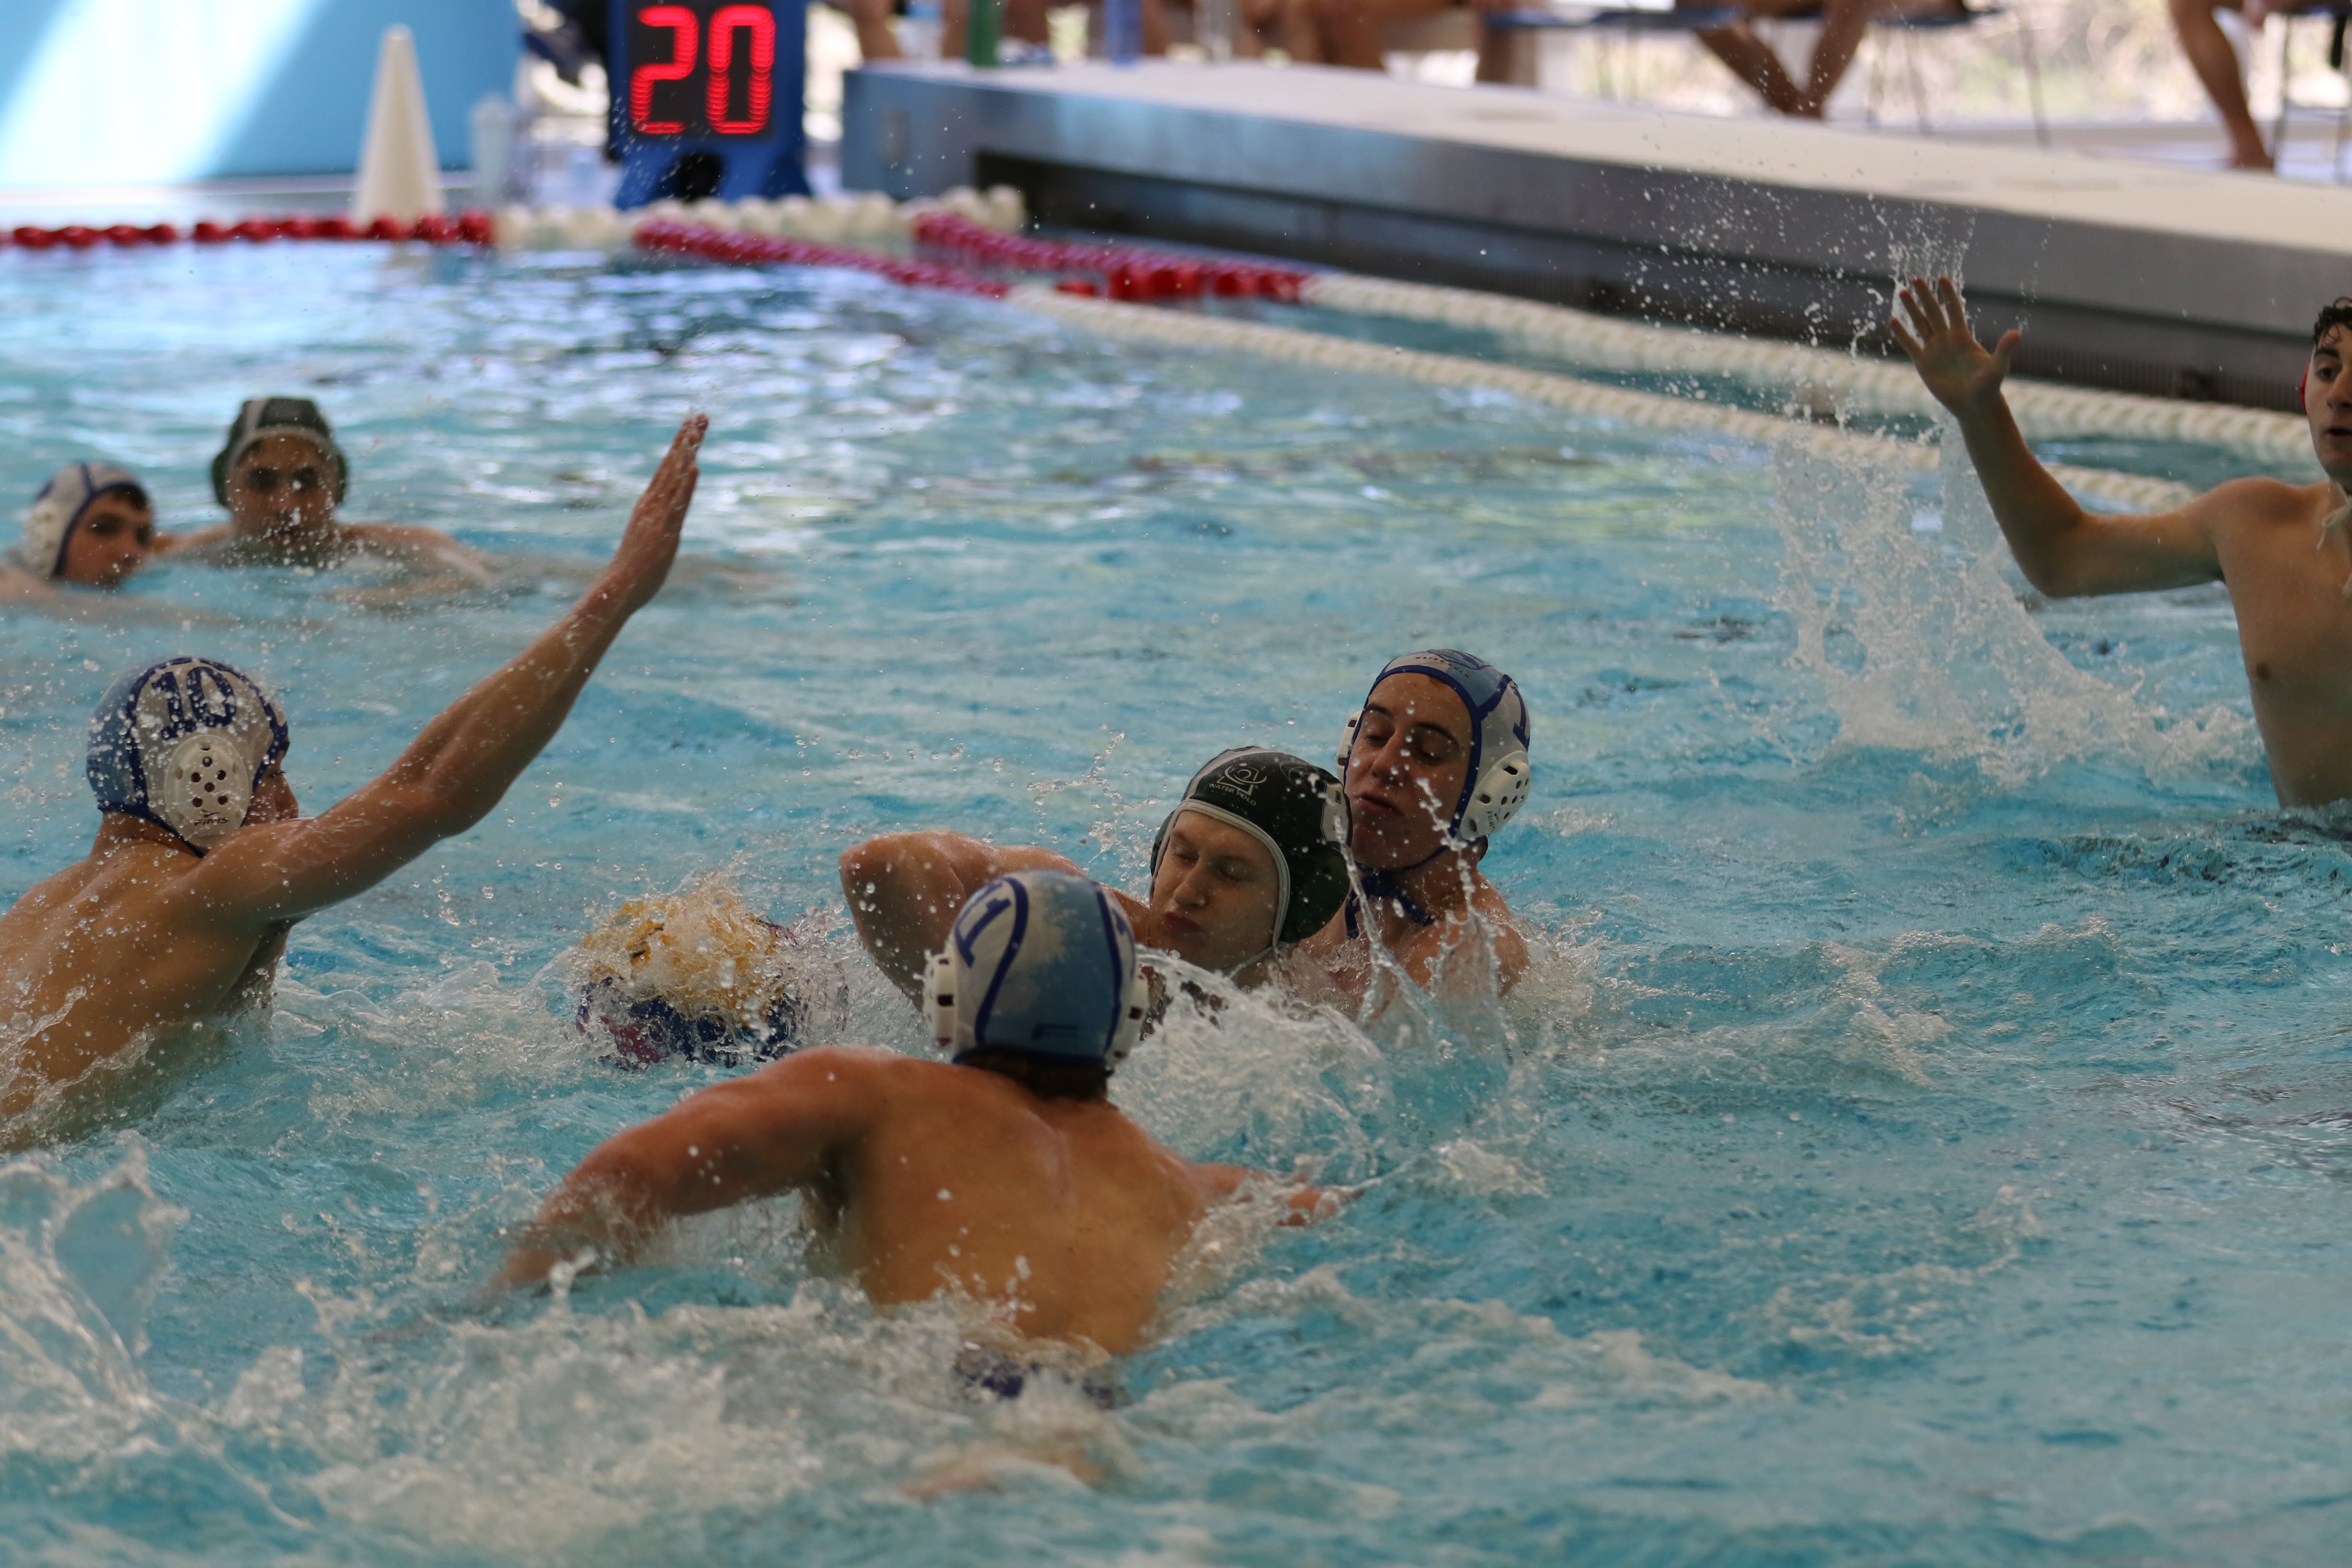 https://stormwaterpolo.ca/cloud/pacificstormwaterpolo/images/Slideshow/Slideshow1A.JPG